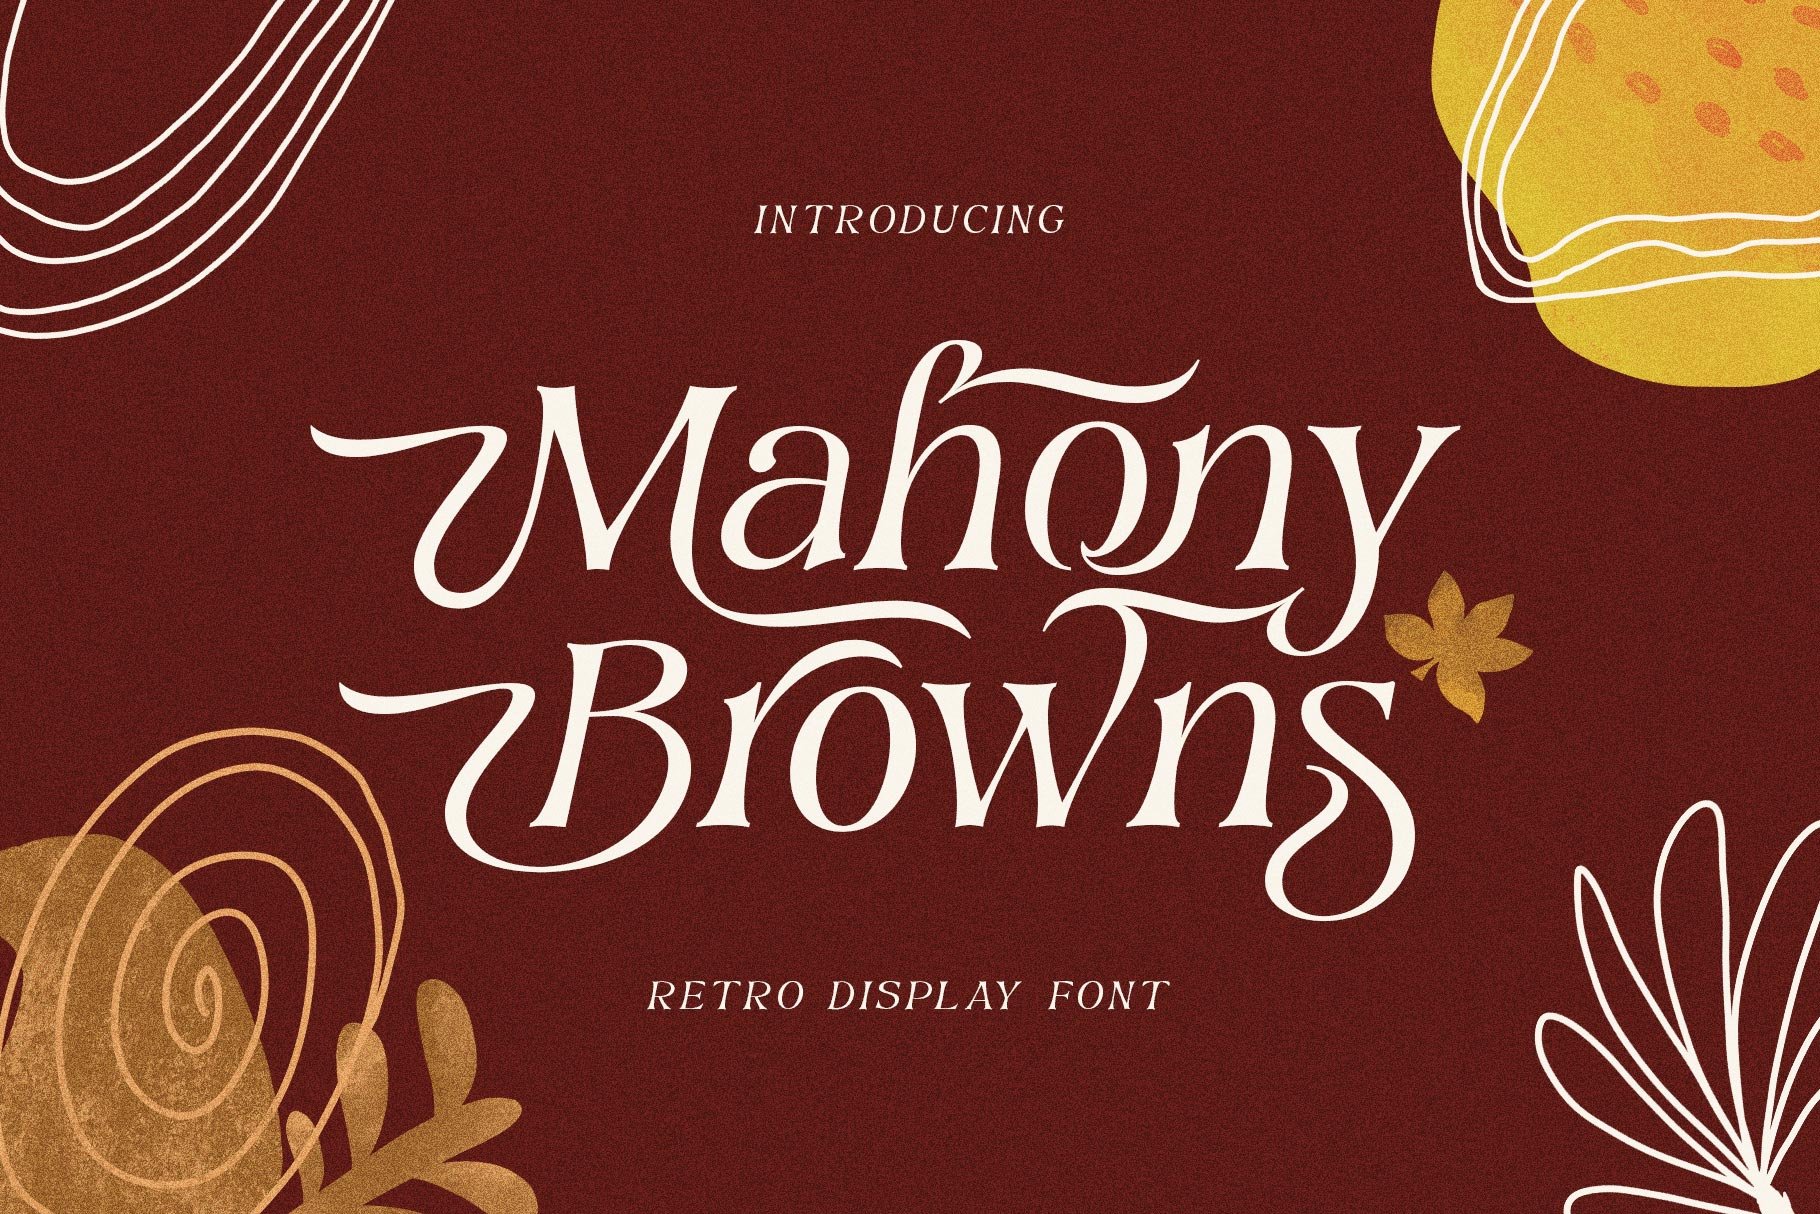 Mahony Browns Typeface cover image.